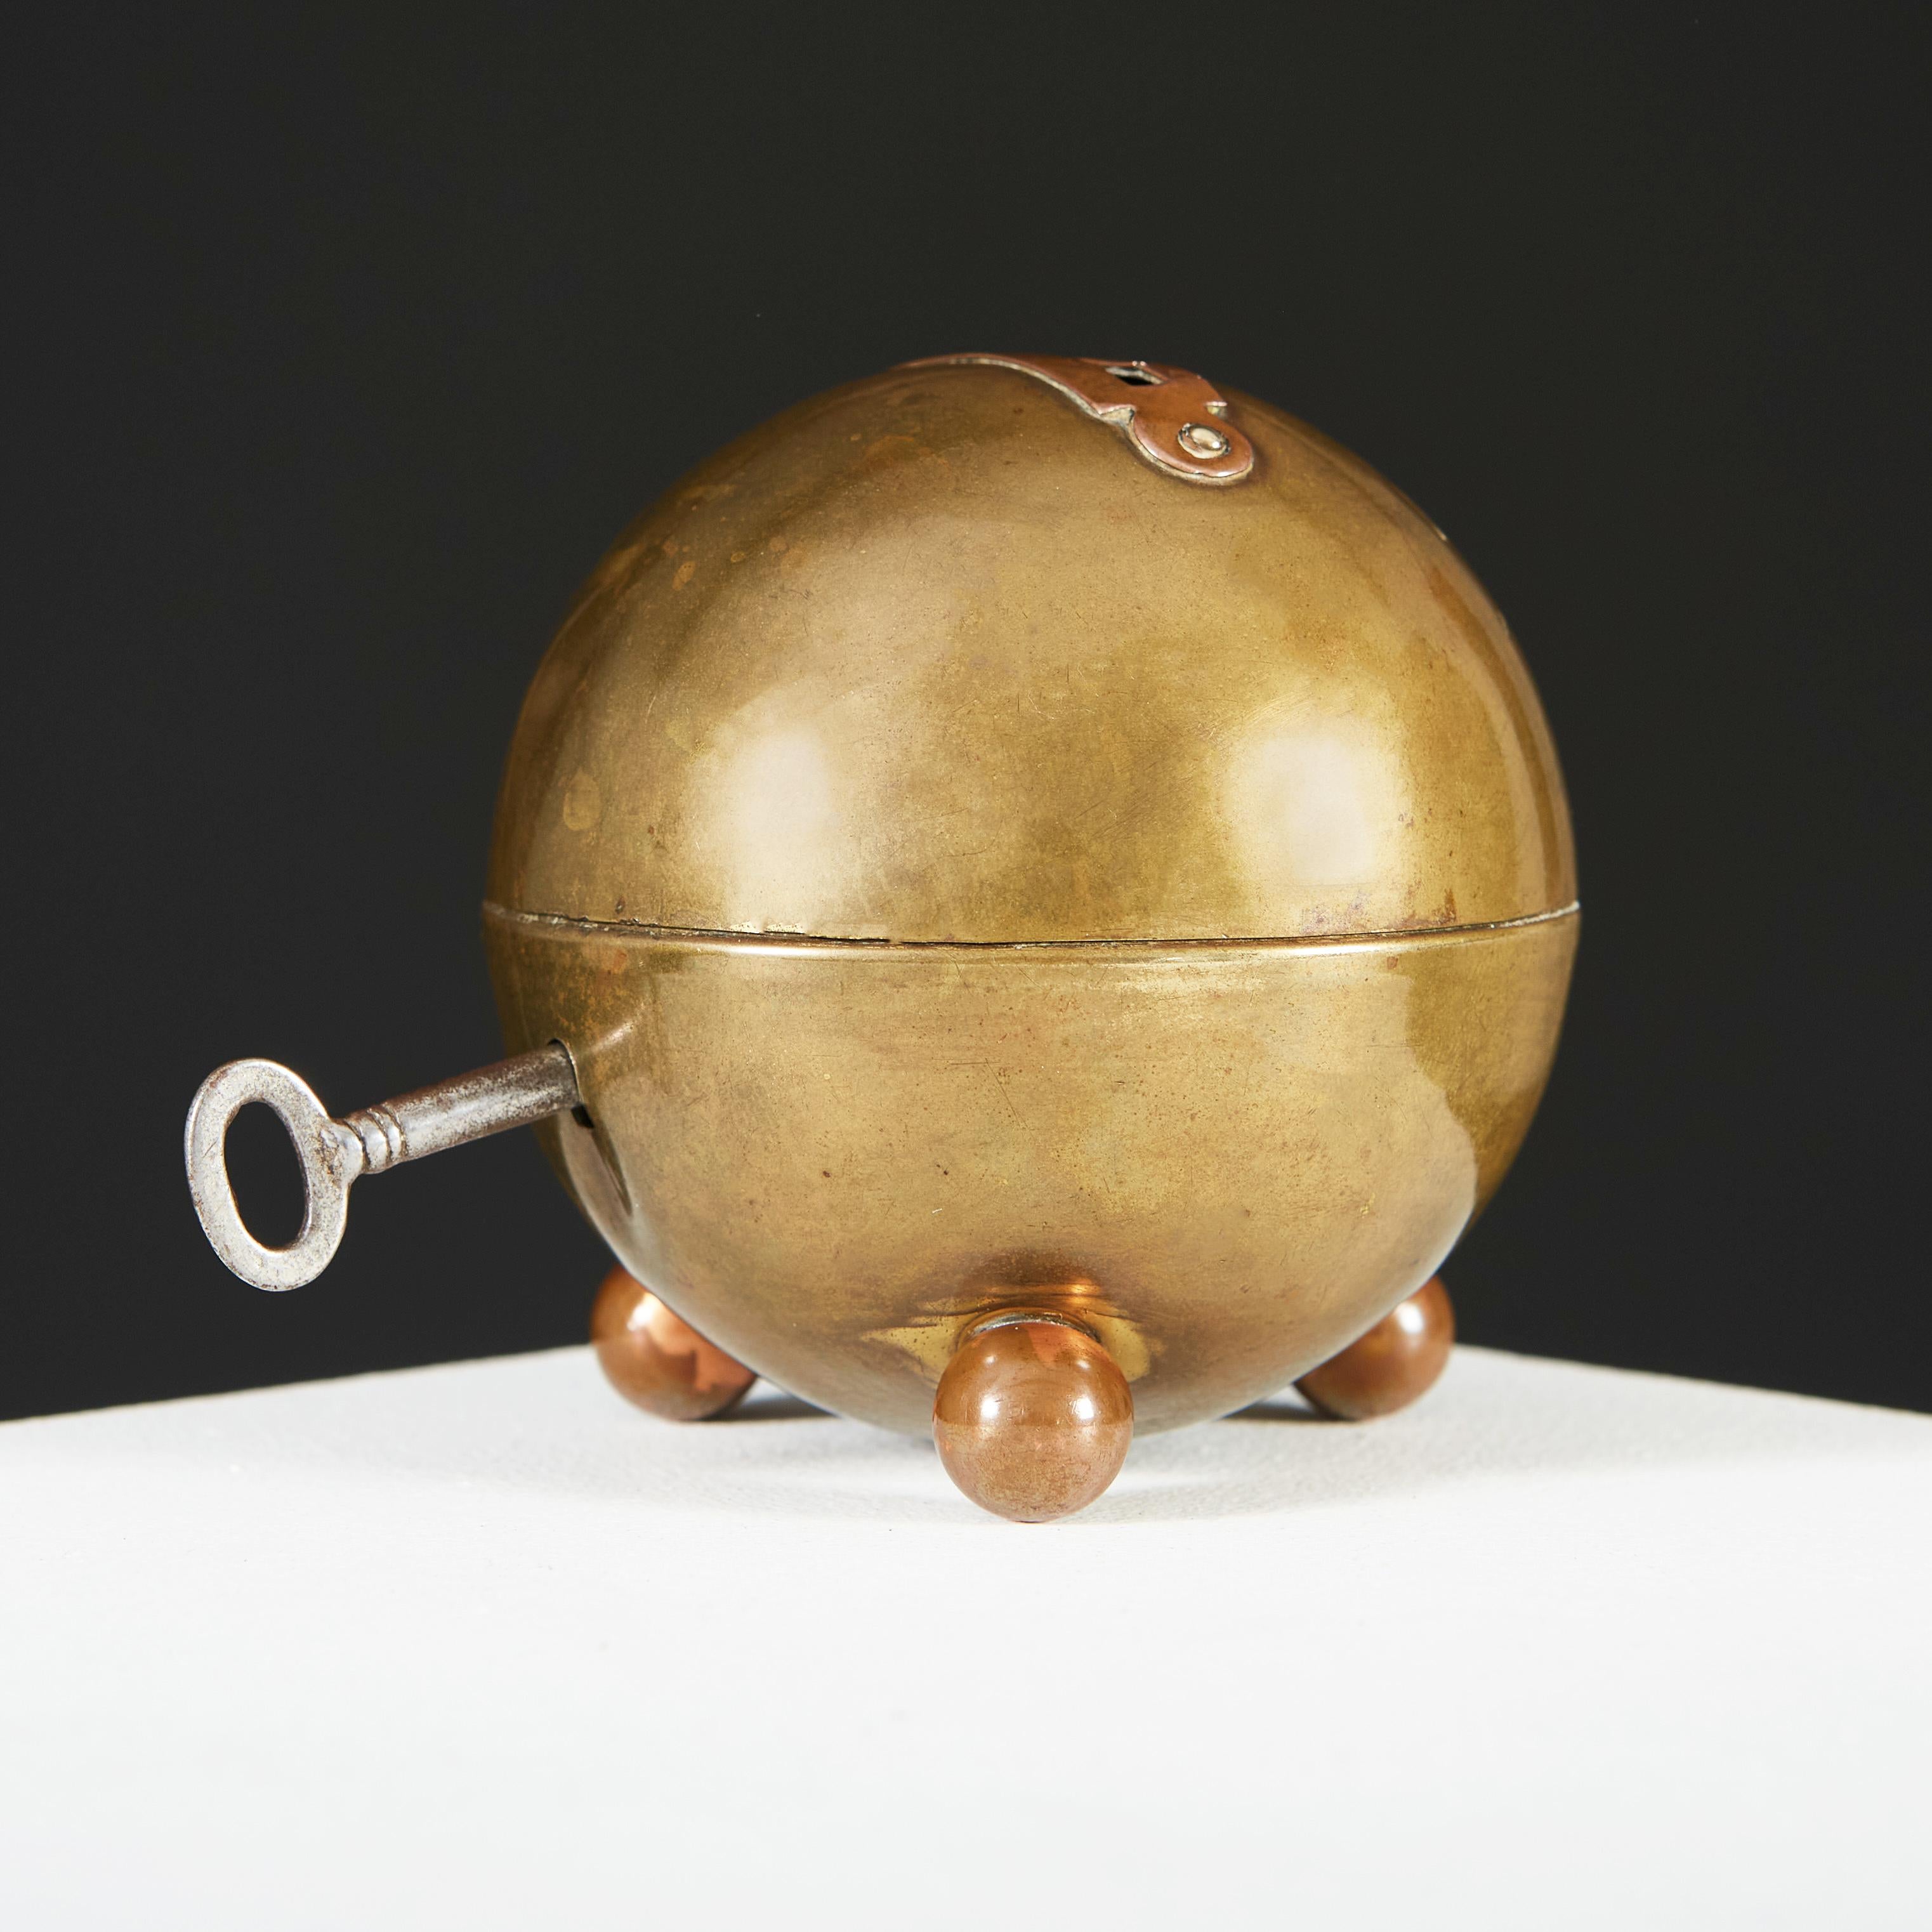 An early twentieth century brass and copper moneybox of spherical form, the brass body opening with lock and key, supported on three copper ball feet, with copper money slot to the top. Attributed to Marianne Brandt.

Marianne Brandt was a German